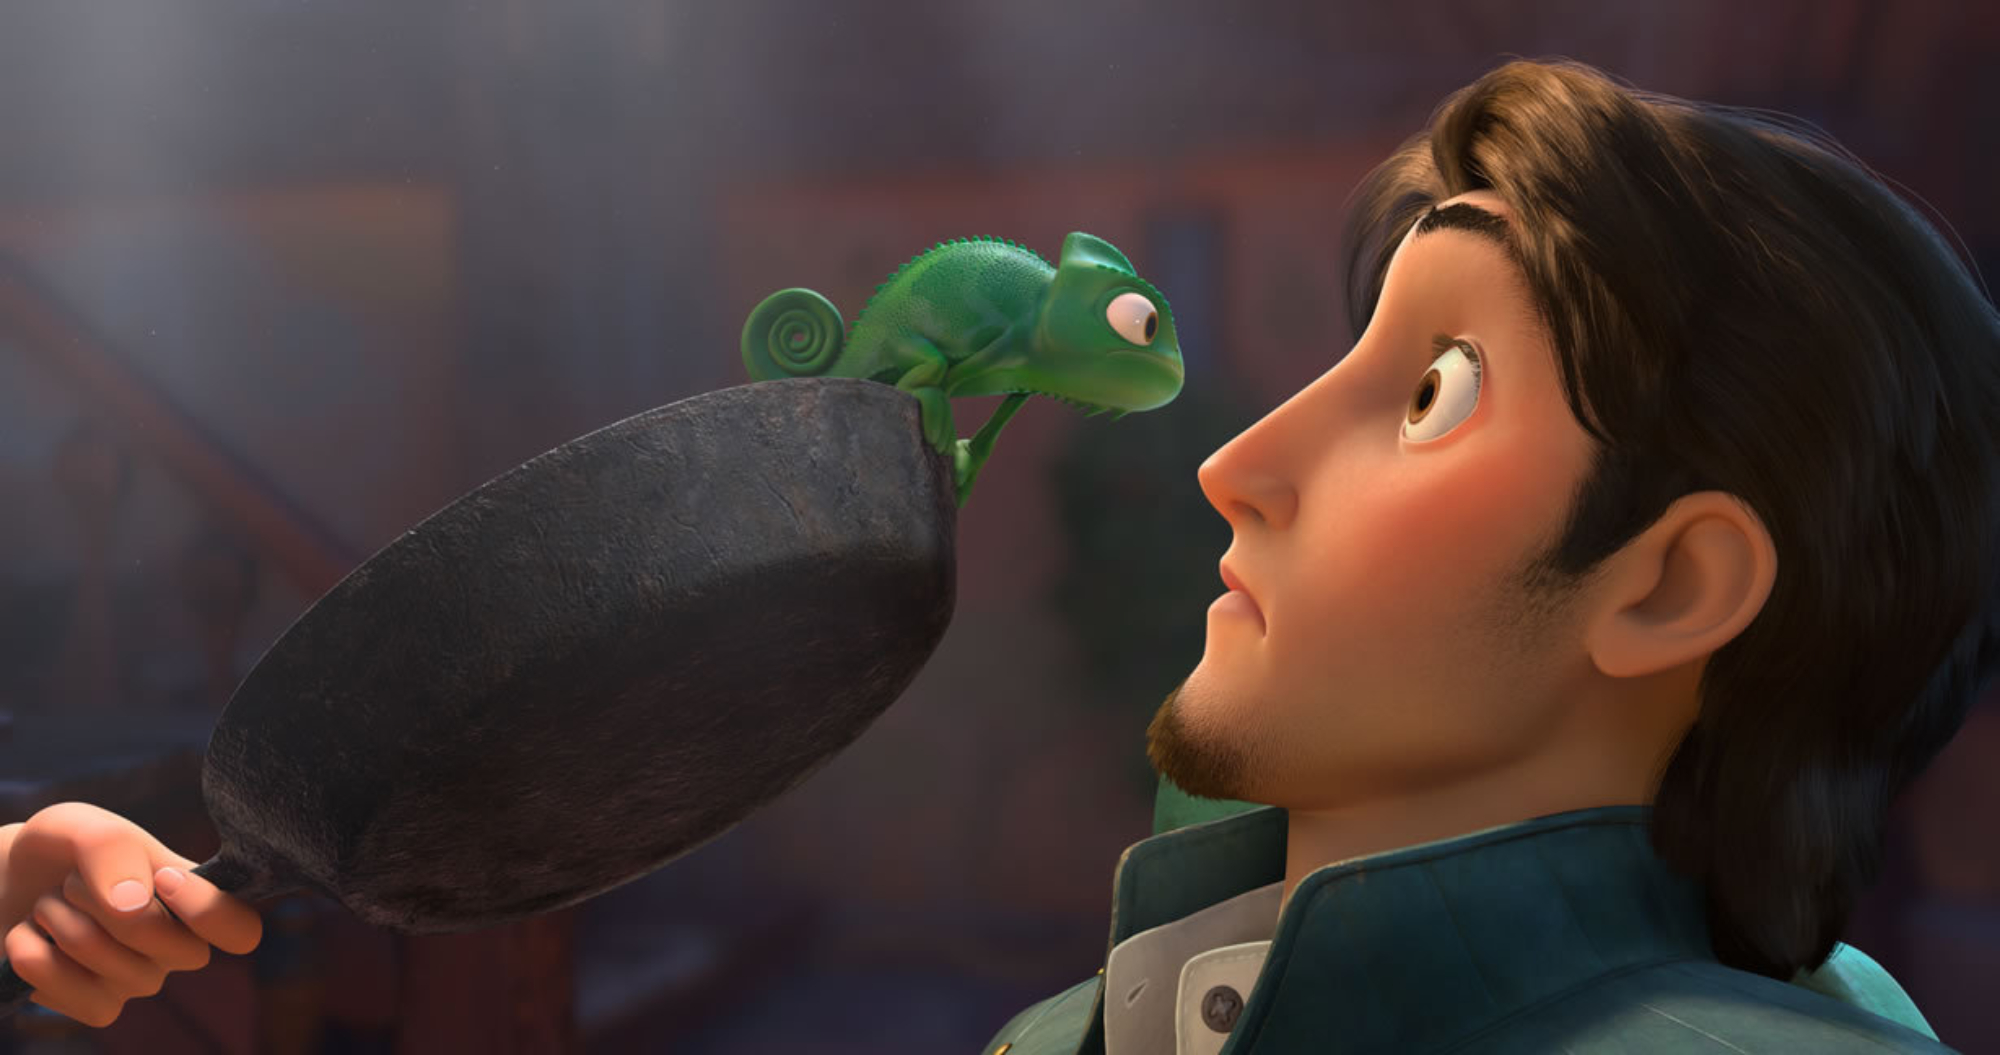 Disney's 'Tangled' with Flynn Rider (voiced by Zachary Levi) staring at Pascal the chameleon in surprise